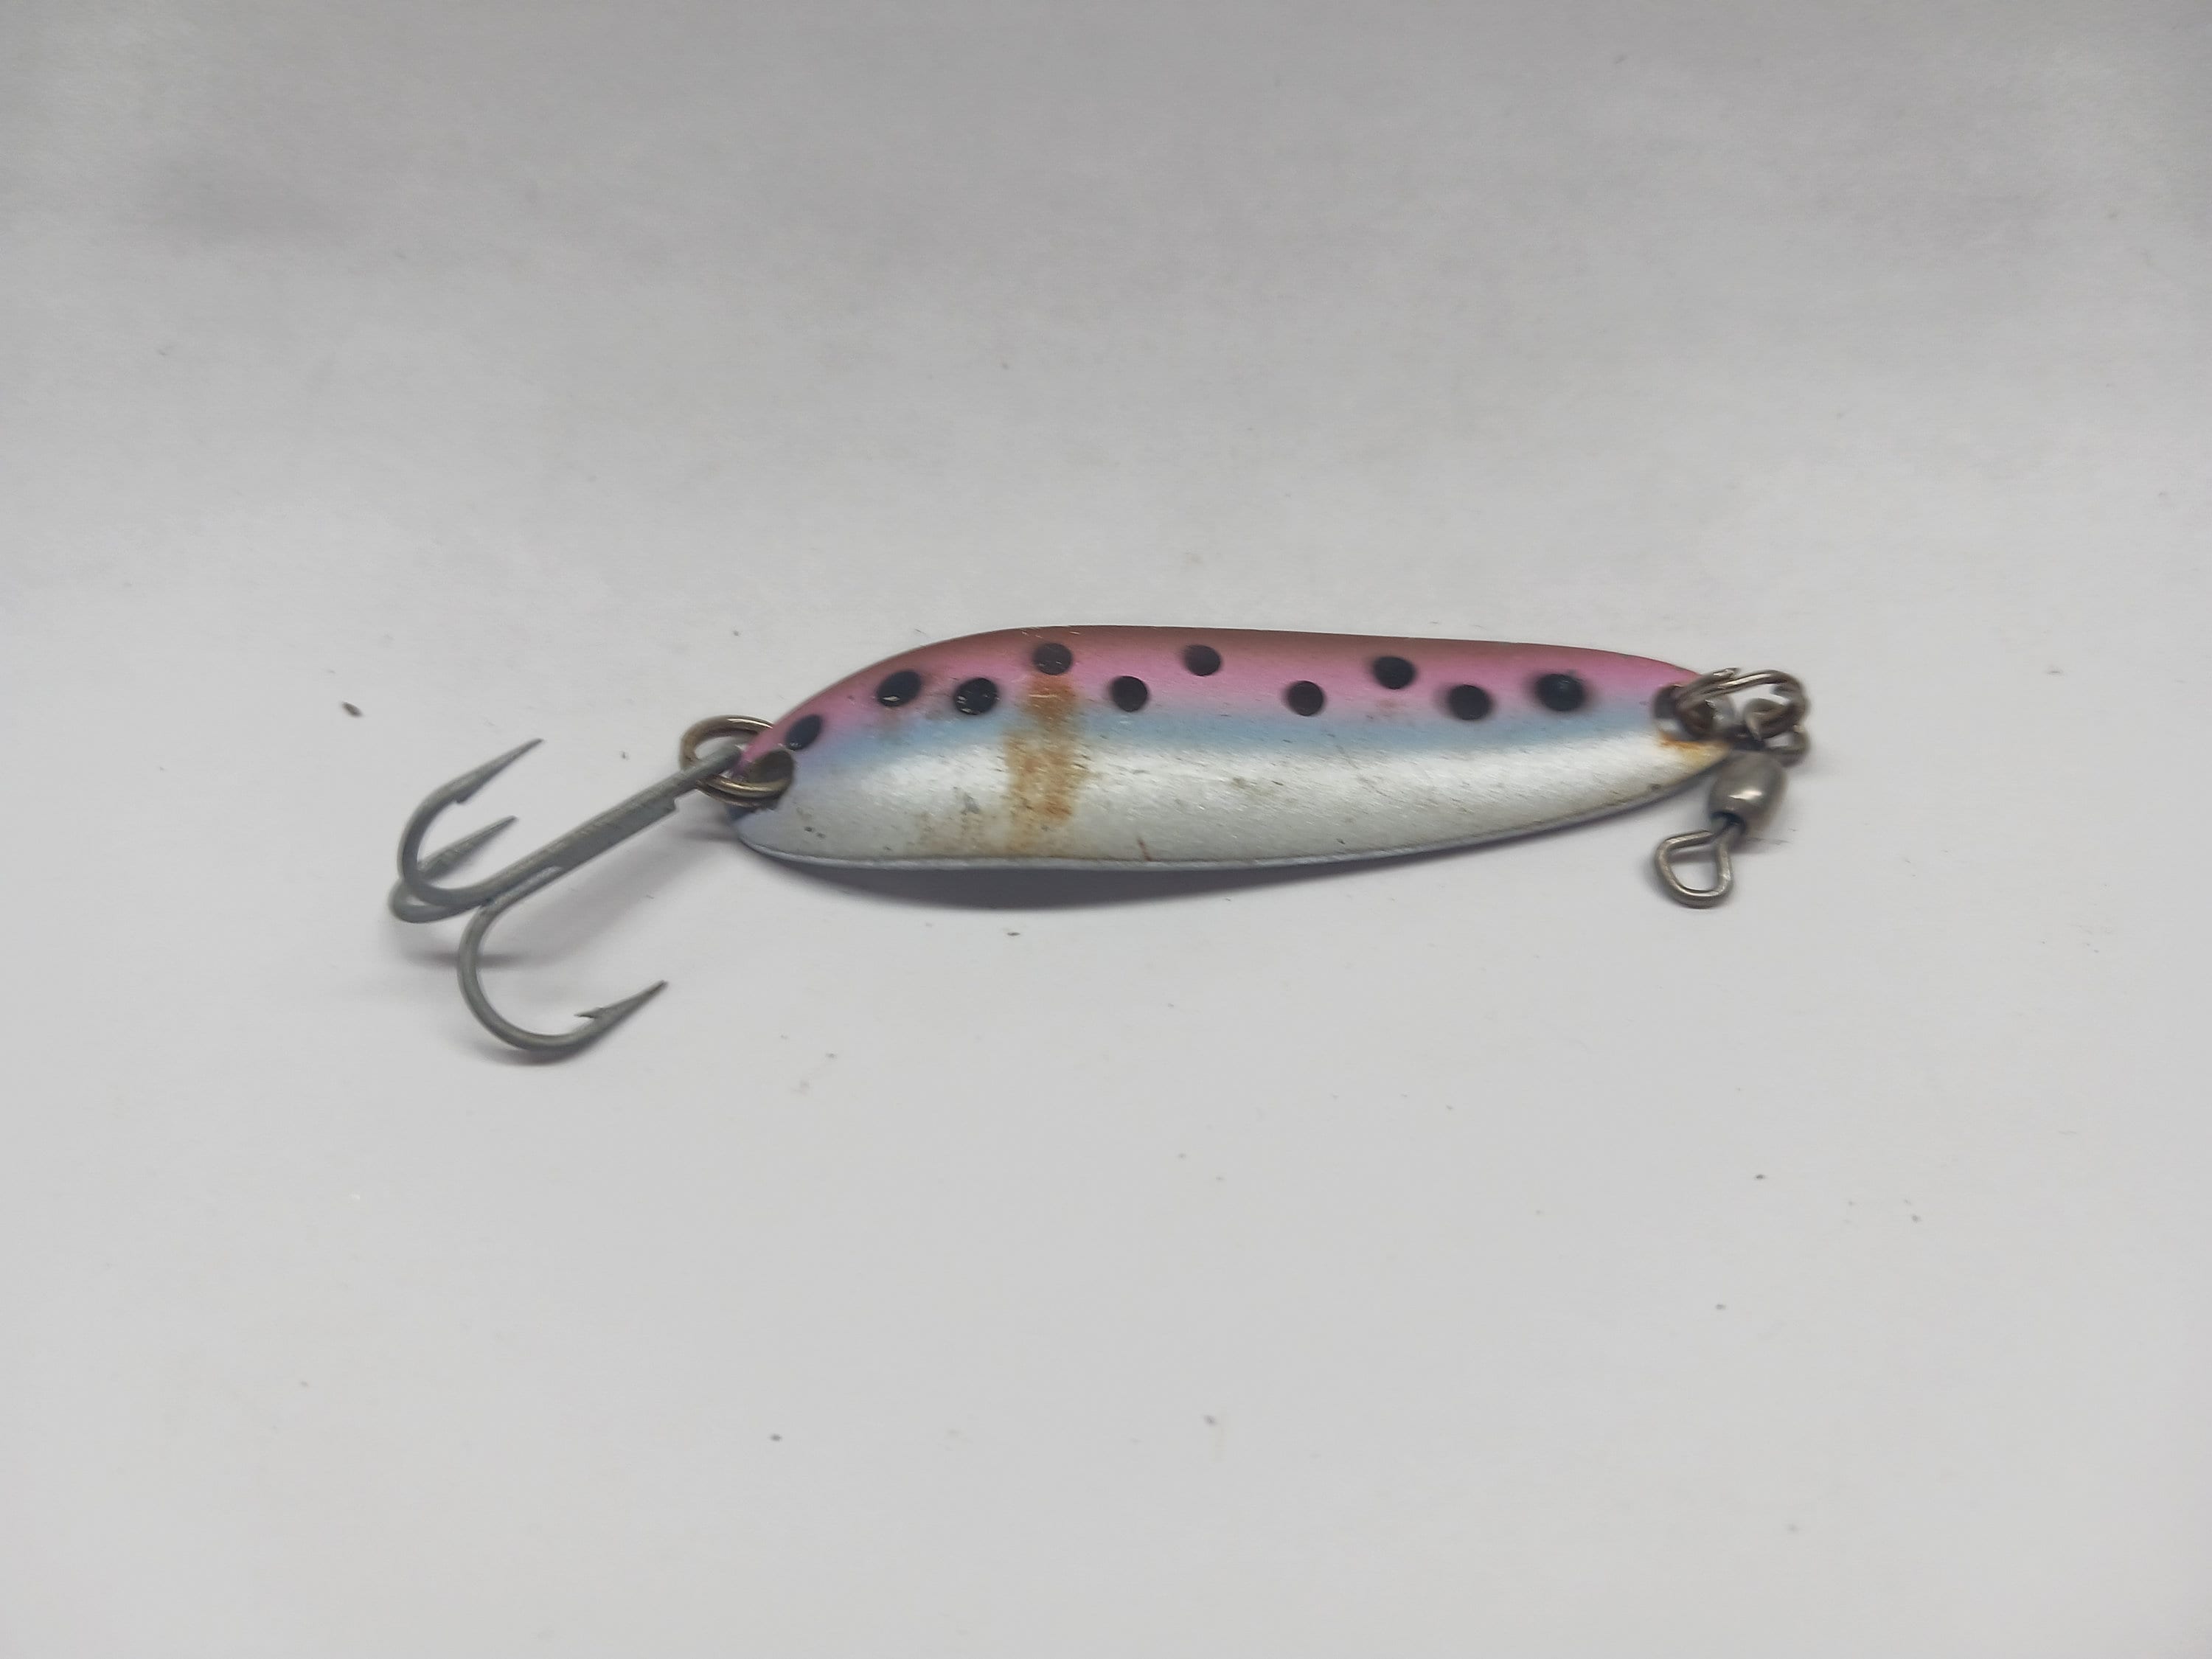 Vintage Fishing Krocodile Luhr Jensen Spoon Lure Made in the